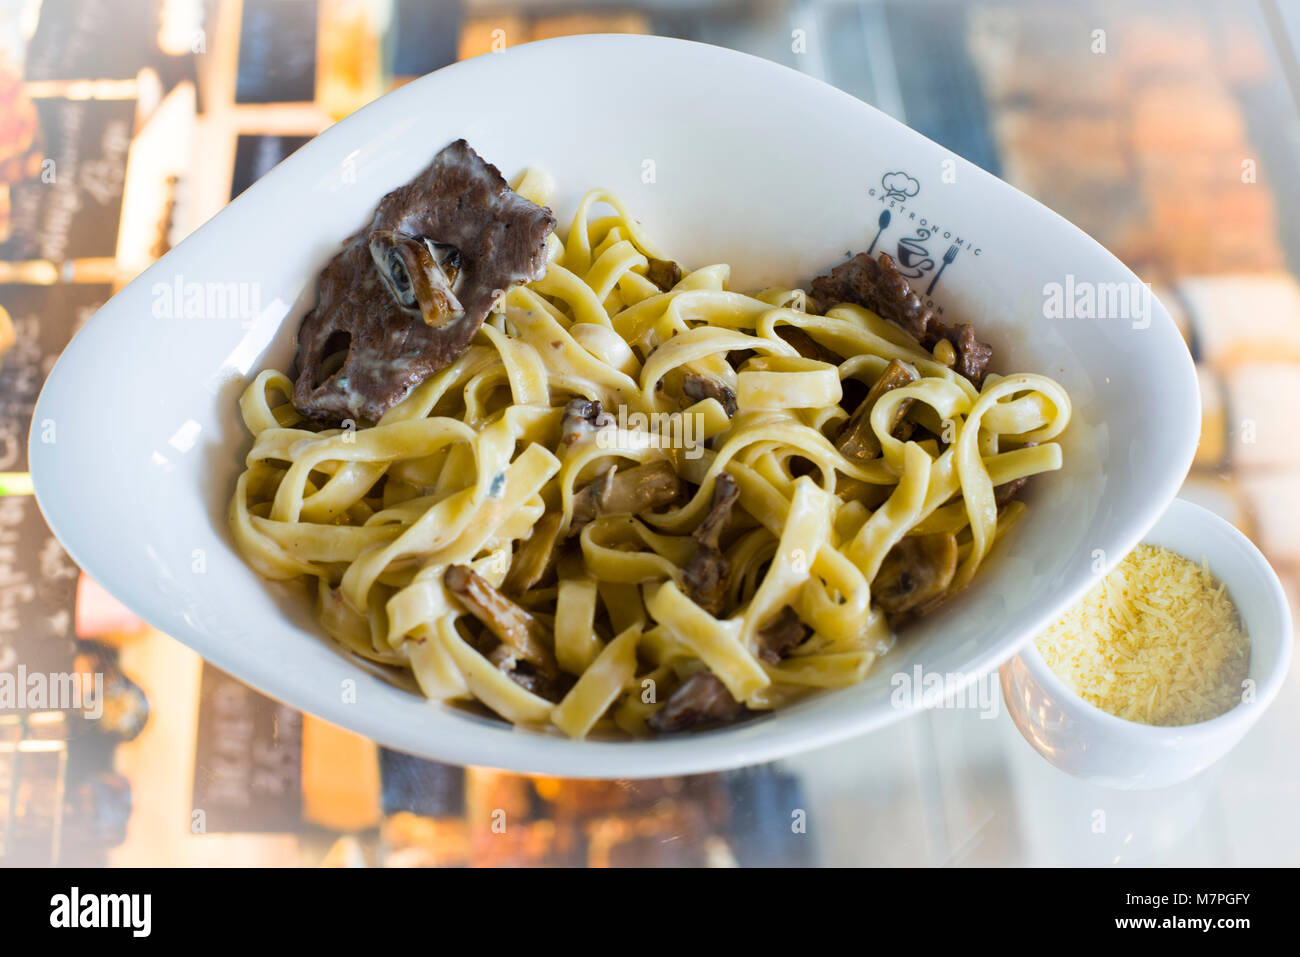 Pasta, prepared with cheese, green, meat, and served in oval deep porcelaine plate Stock Photo